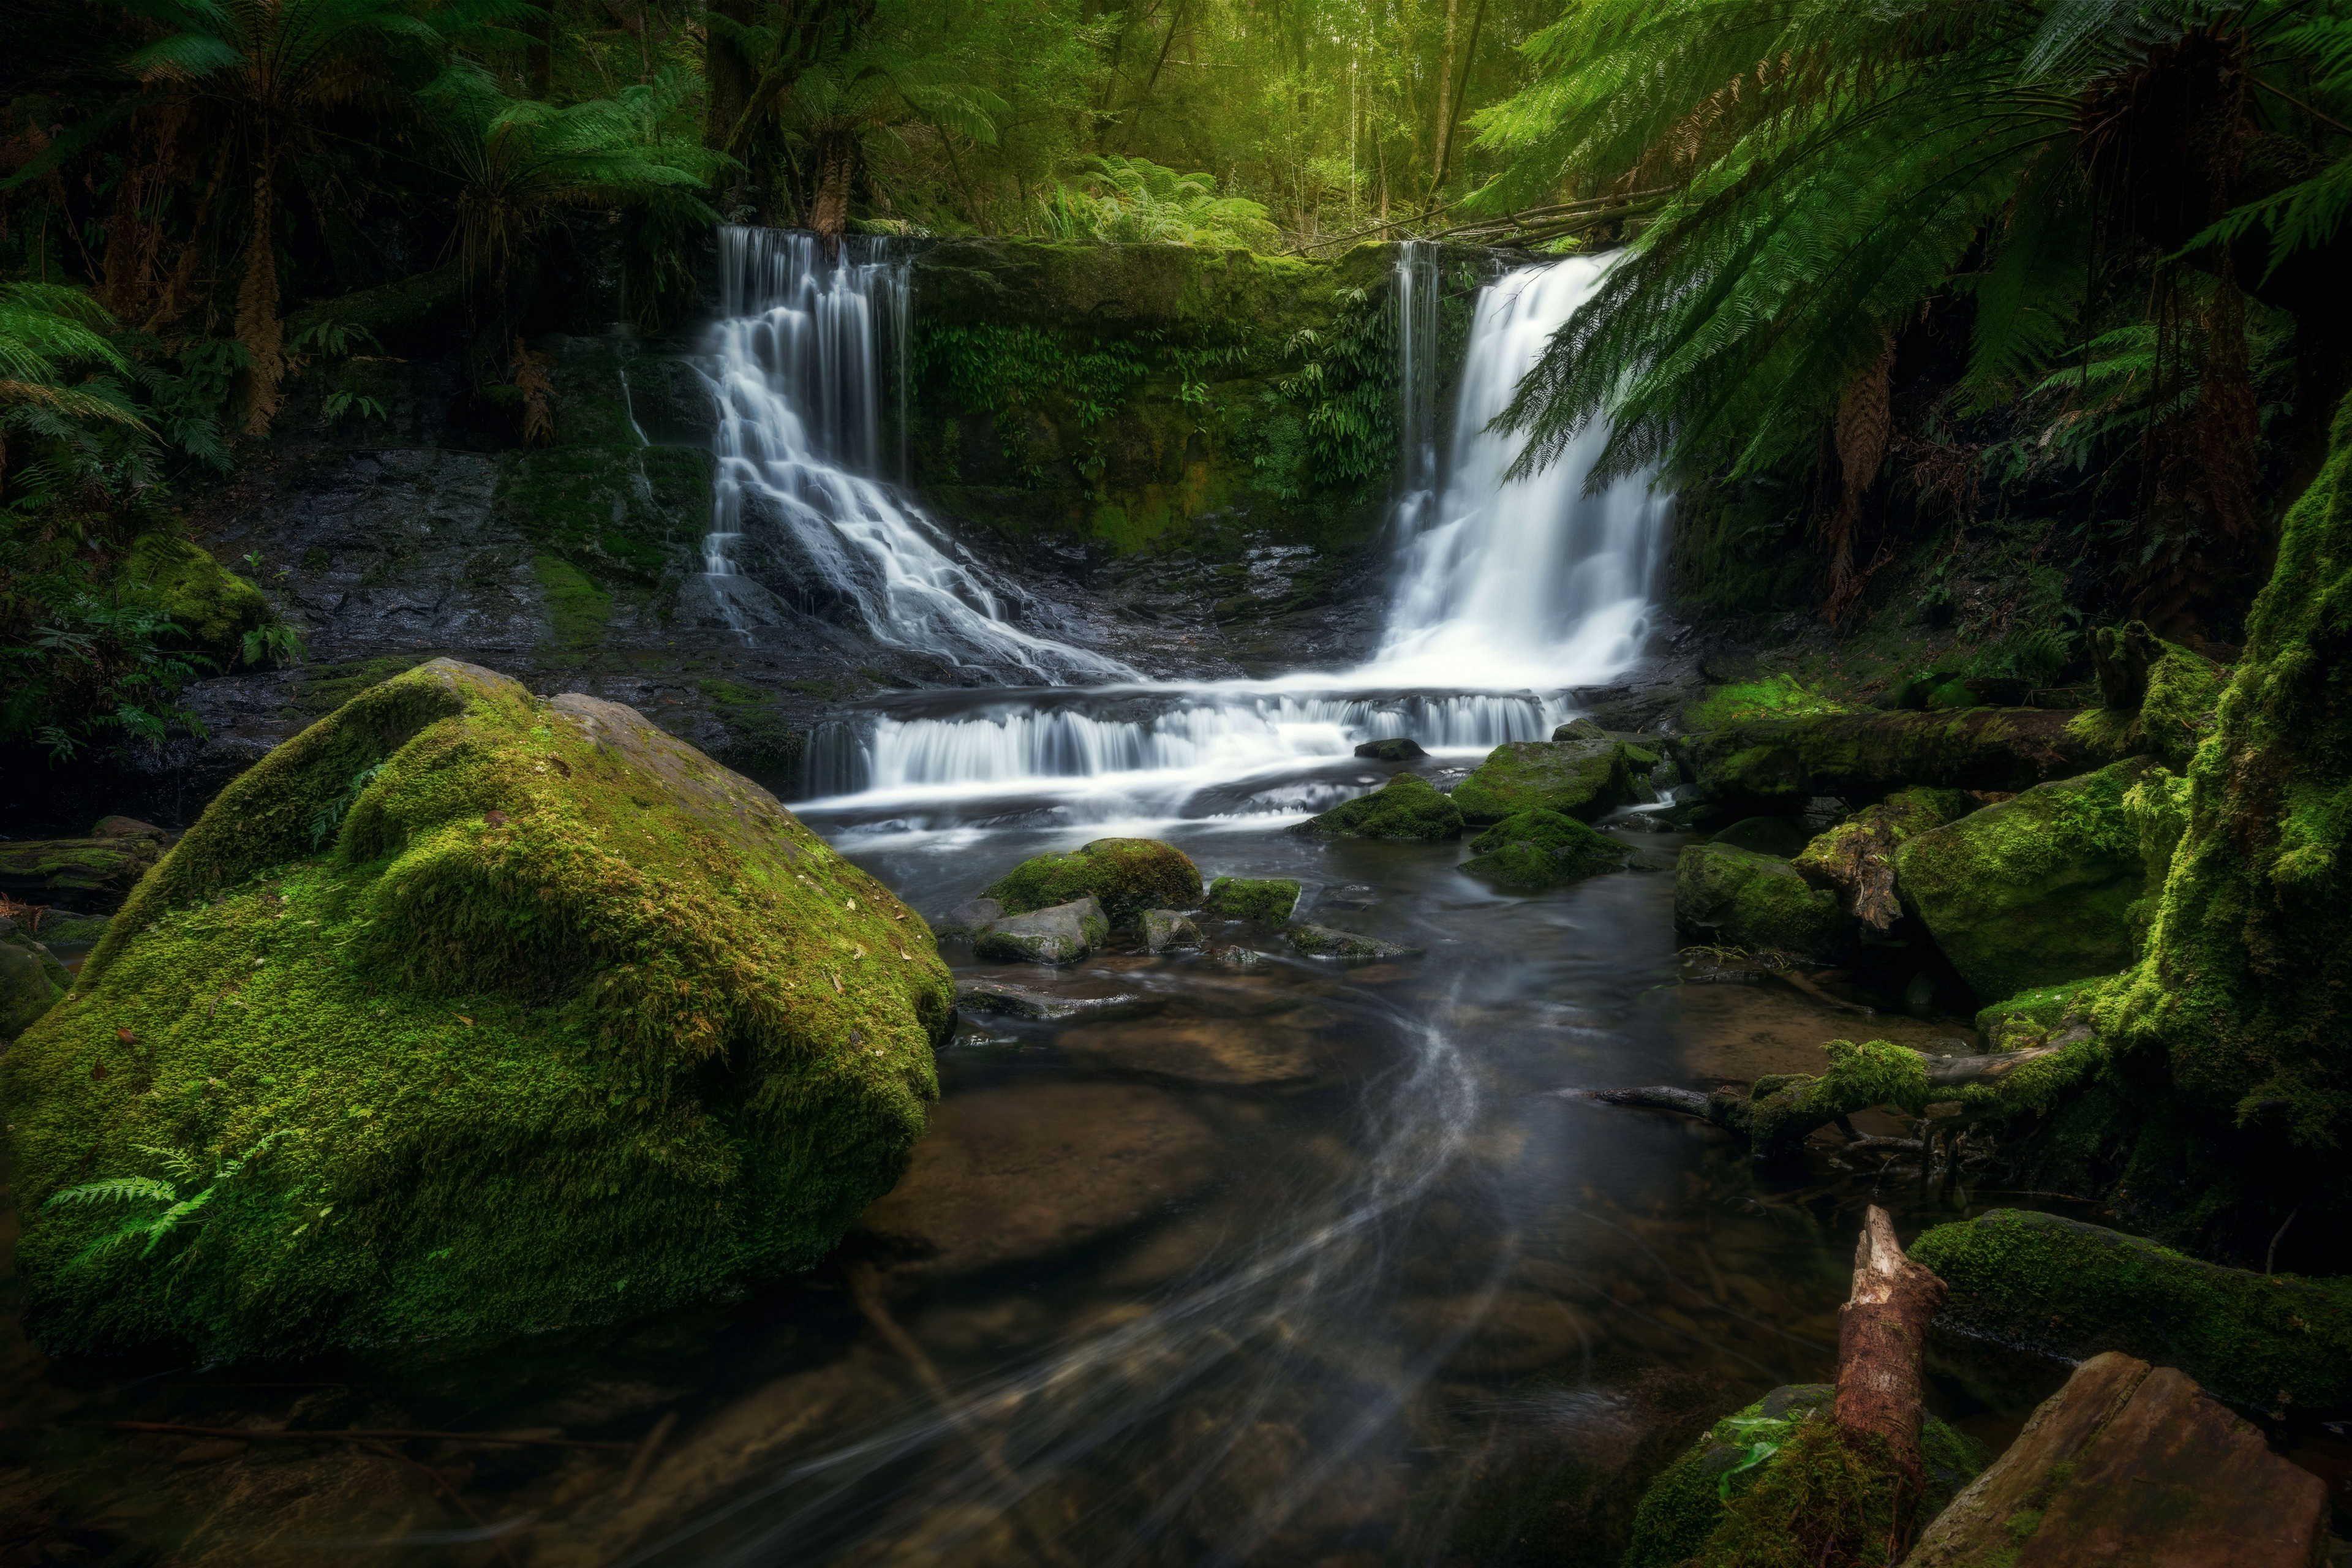 General 3840x2560 Australia forest nature jungle waterfall stones moss trees